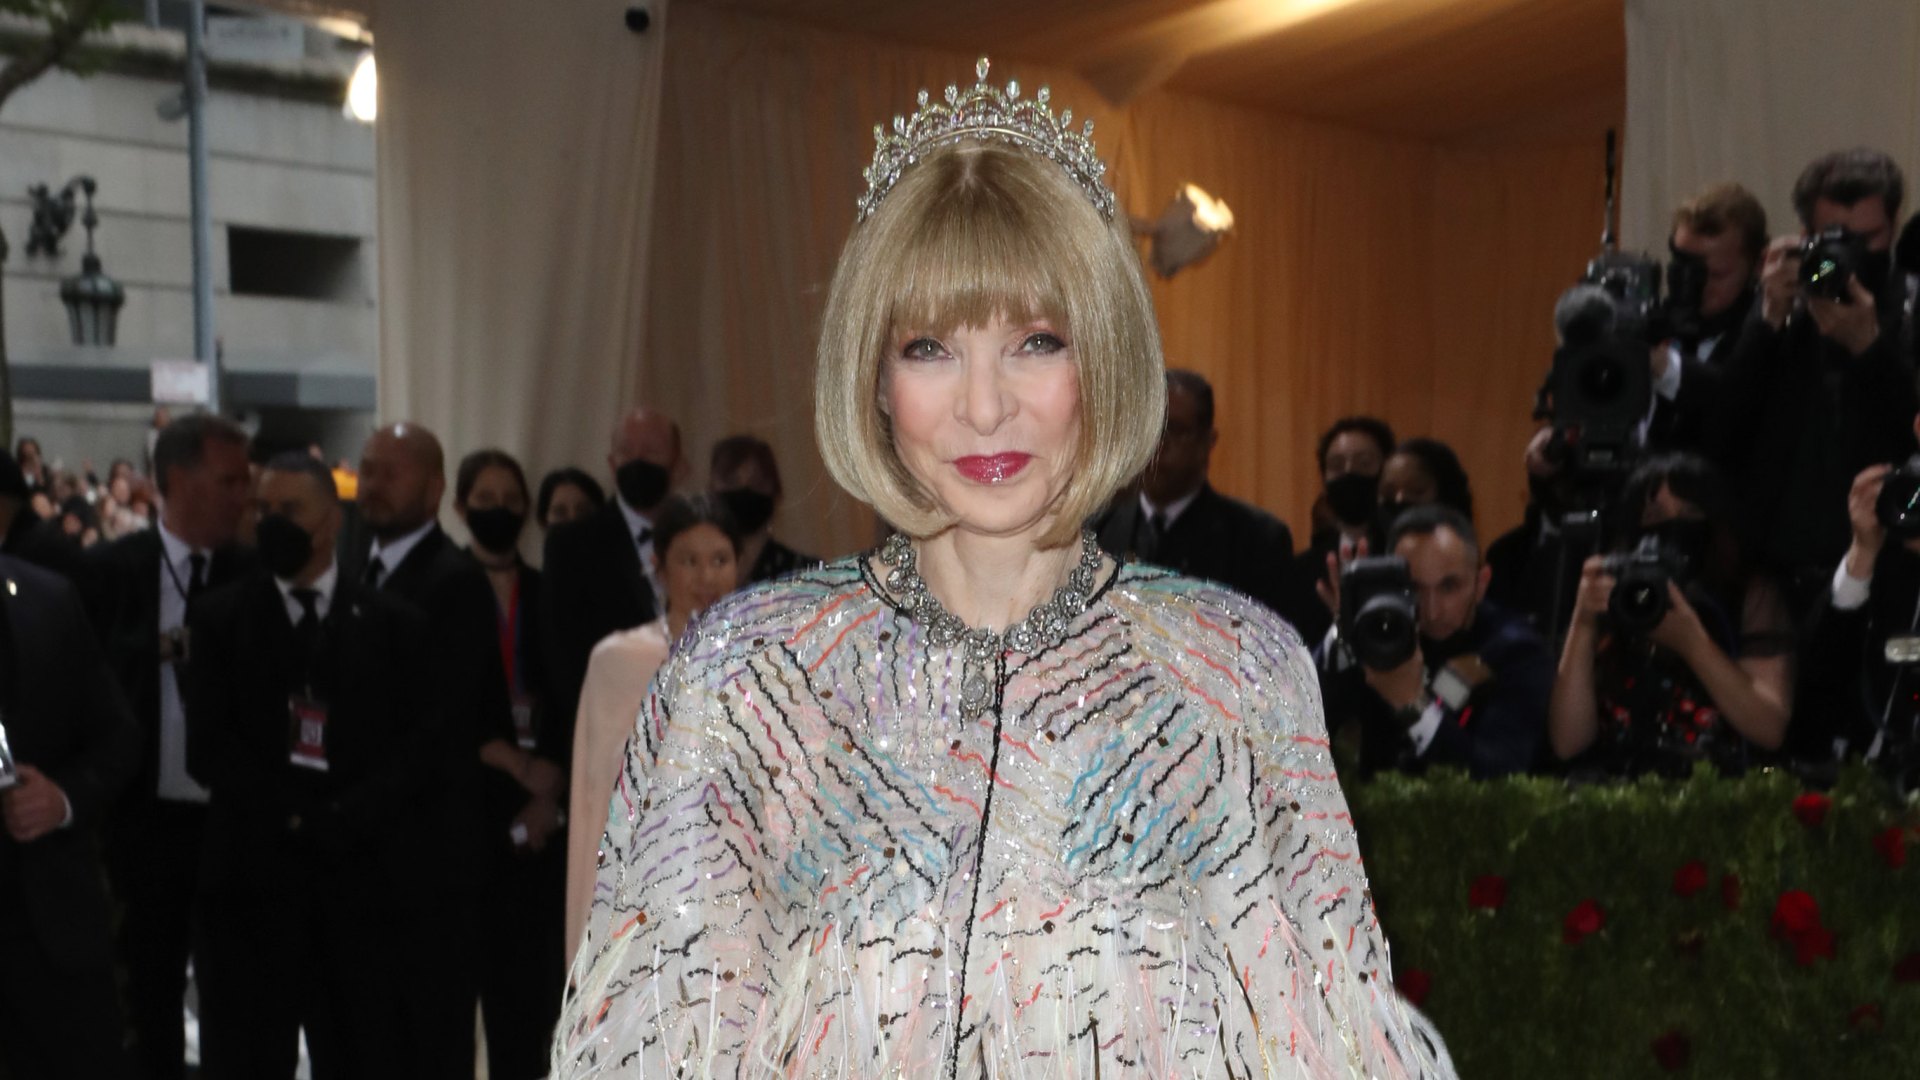 Who Is Banned From the Met Gala? Stars Not Allowed Inside In Touch Weekly